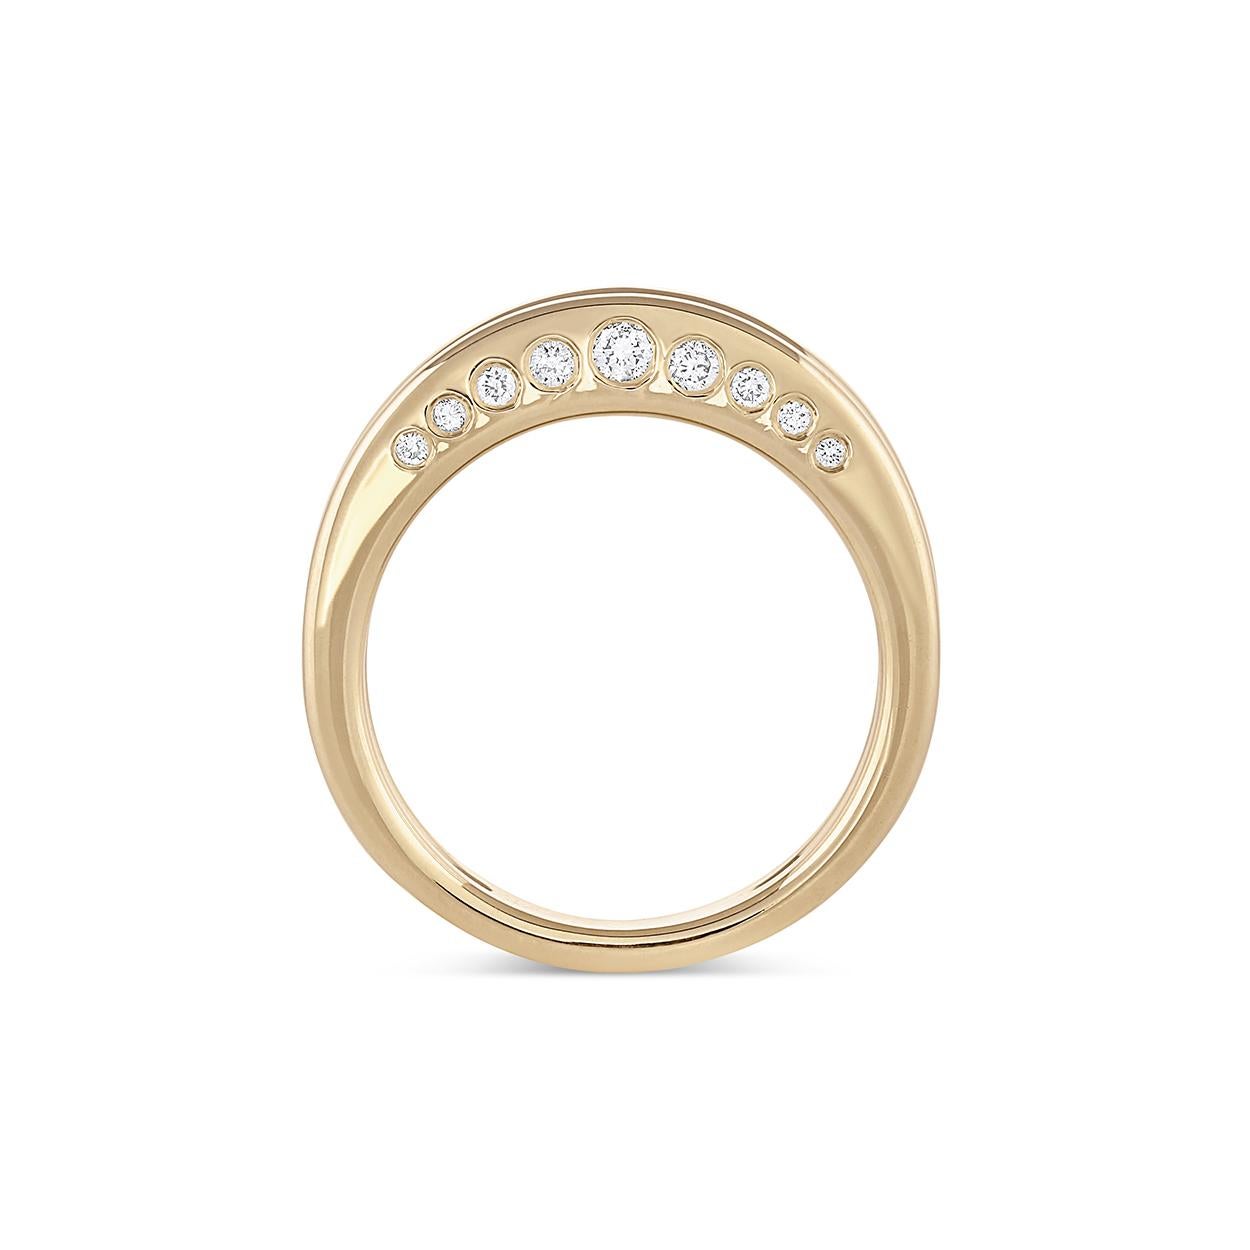 For Sale:  EMBLM Twin Crescent Ring – 14K Yellow Gold, Bezel Set White Diamonds 2